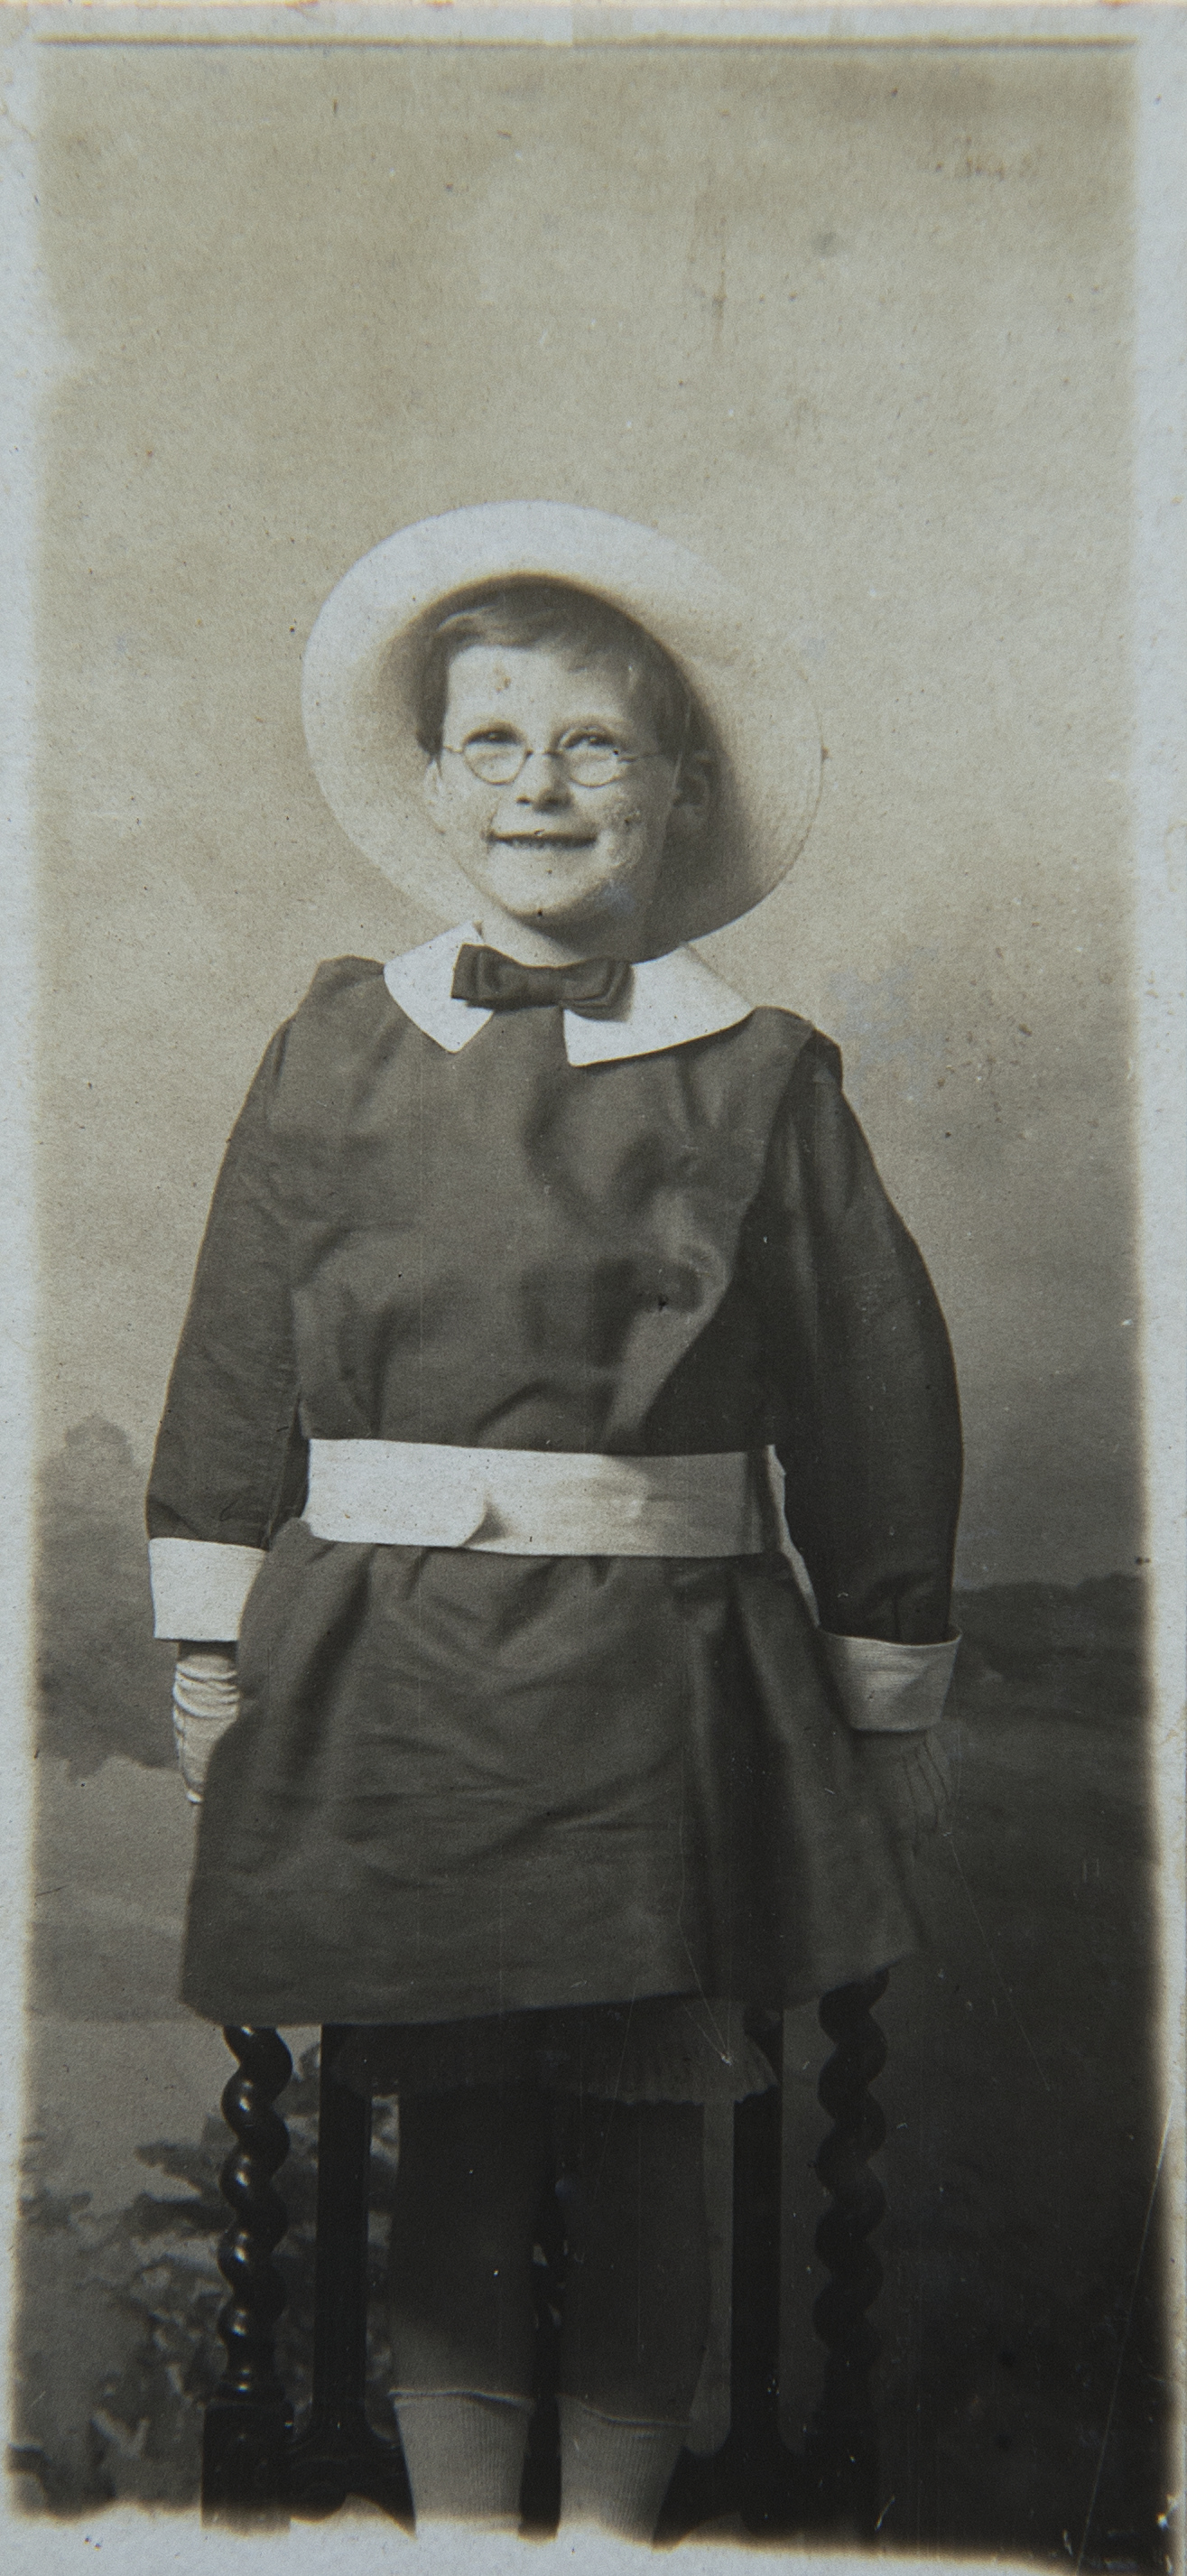 Black and white portrait of young woman wearing a hat and glasses